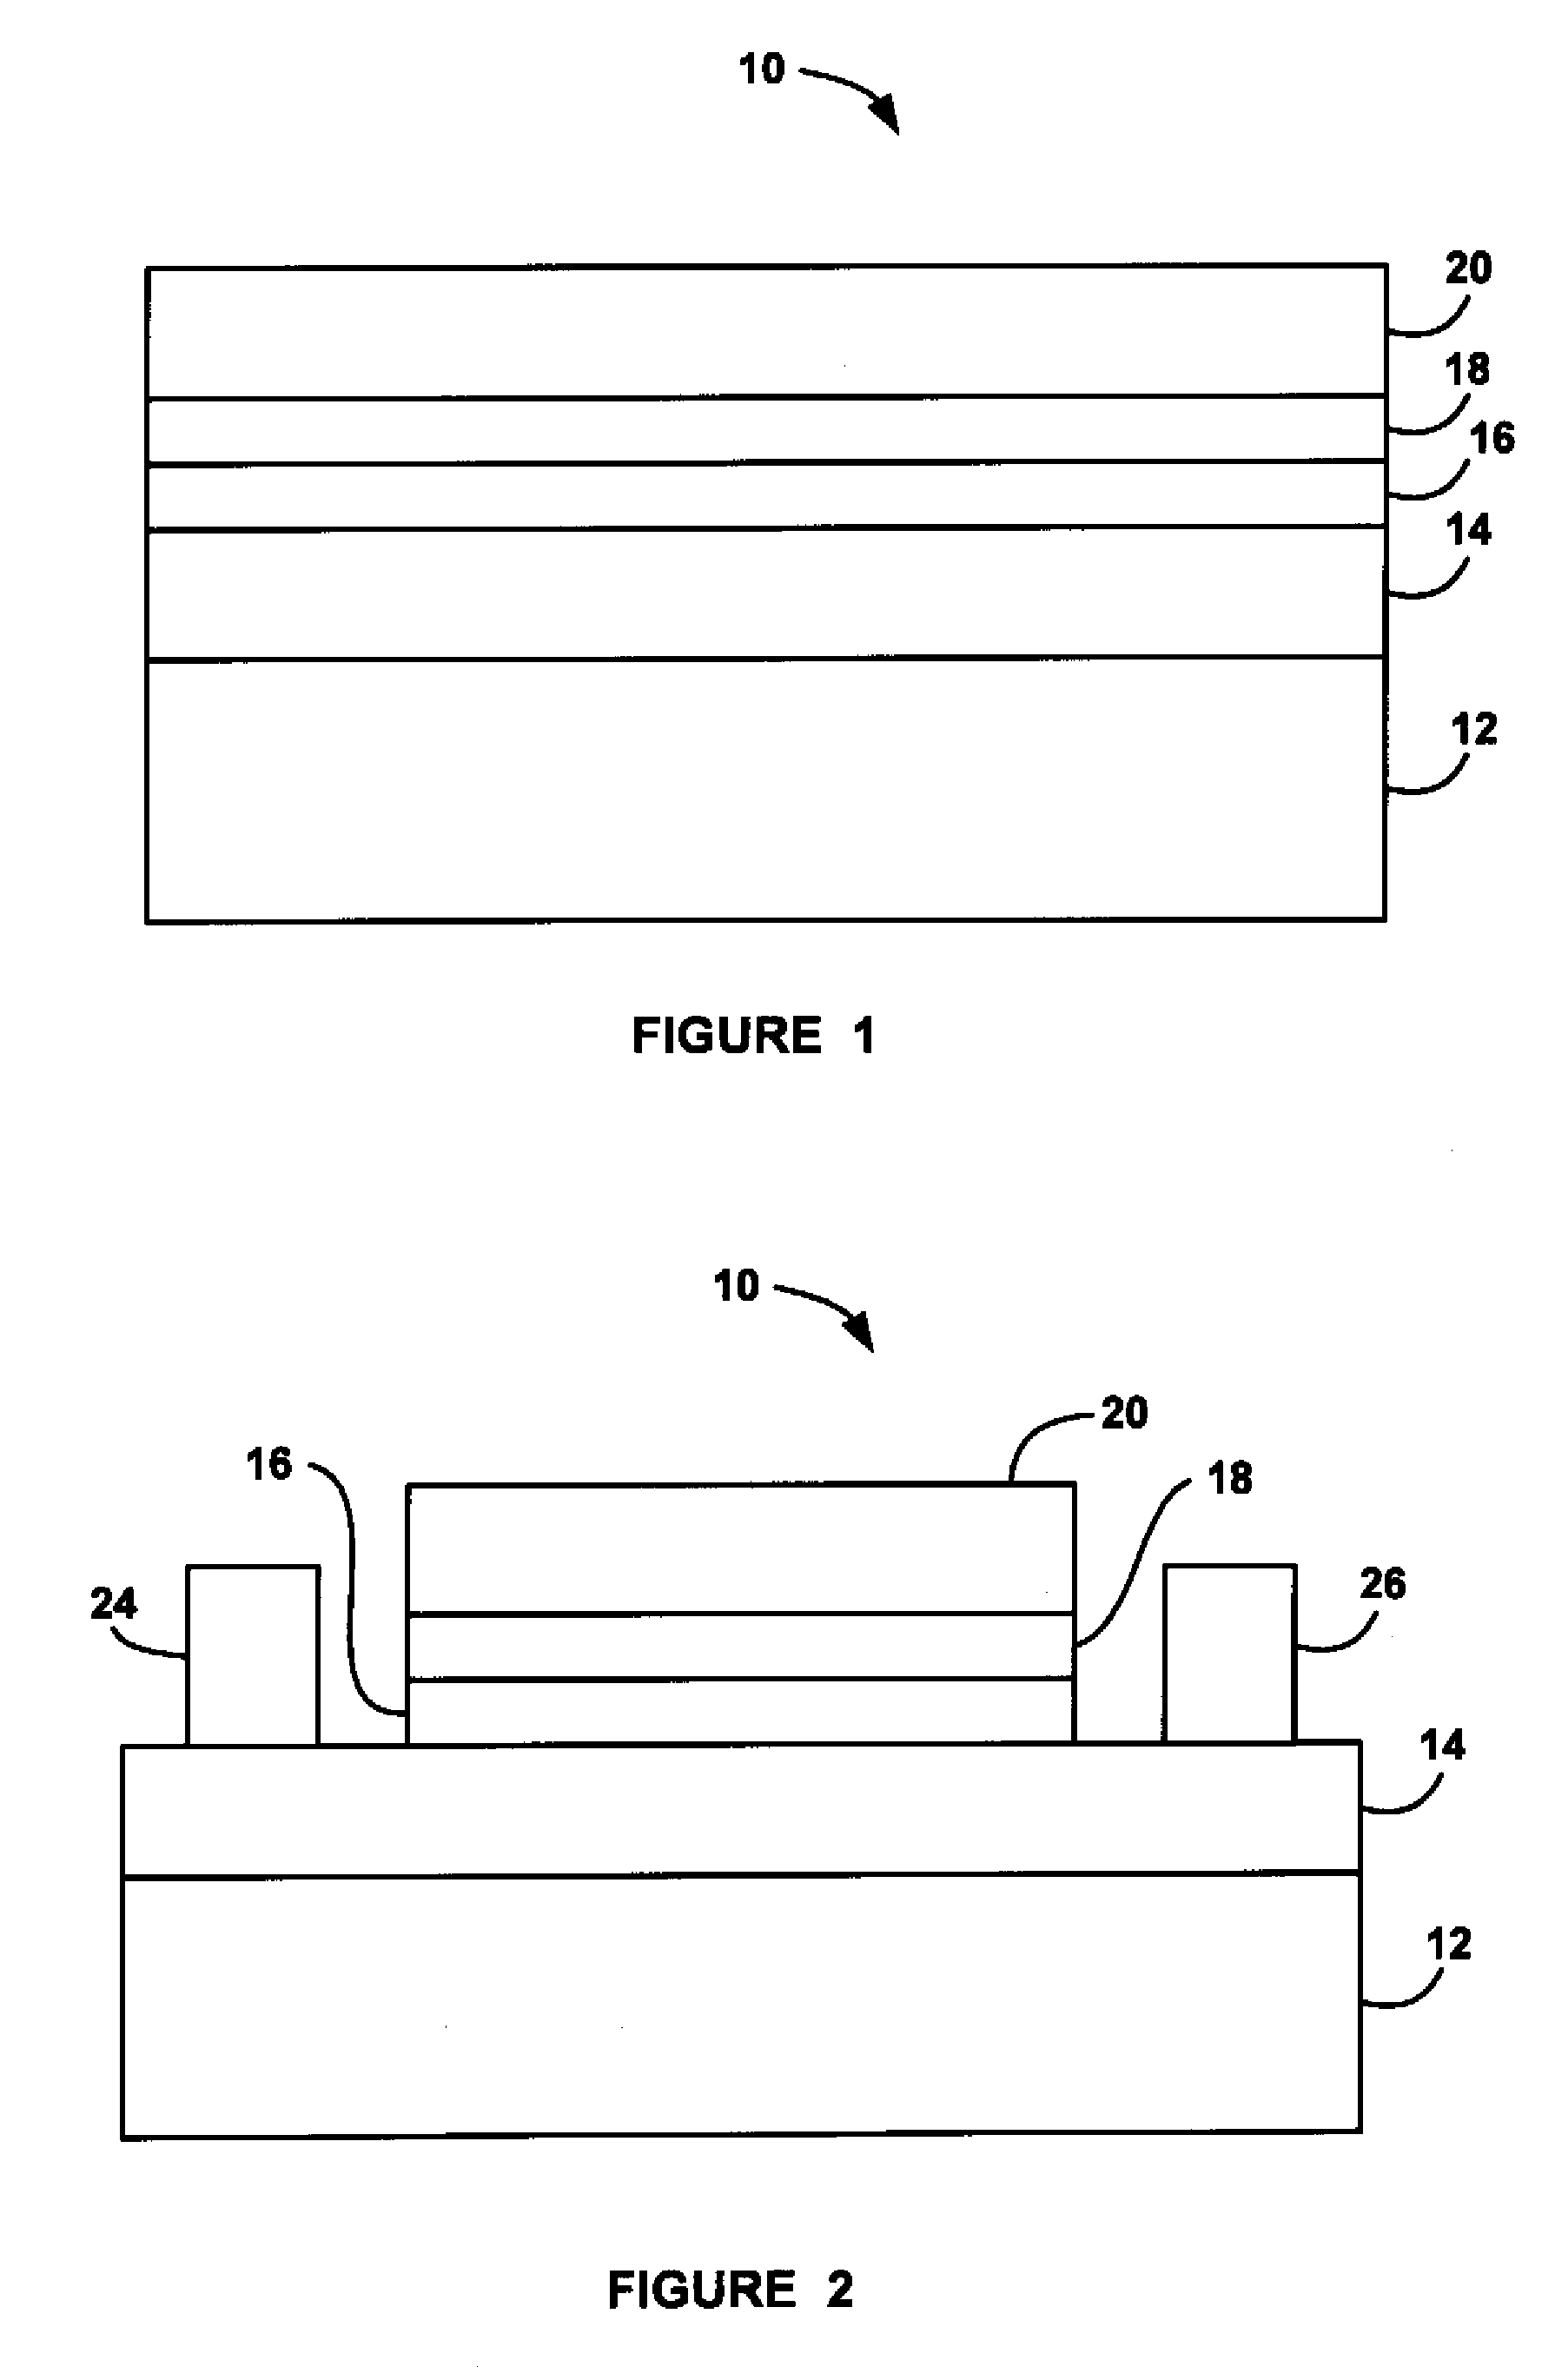 Method for fabricating a nitride FET including passivation layers